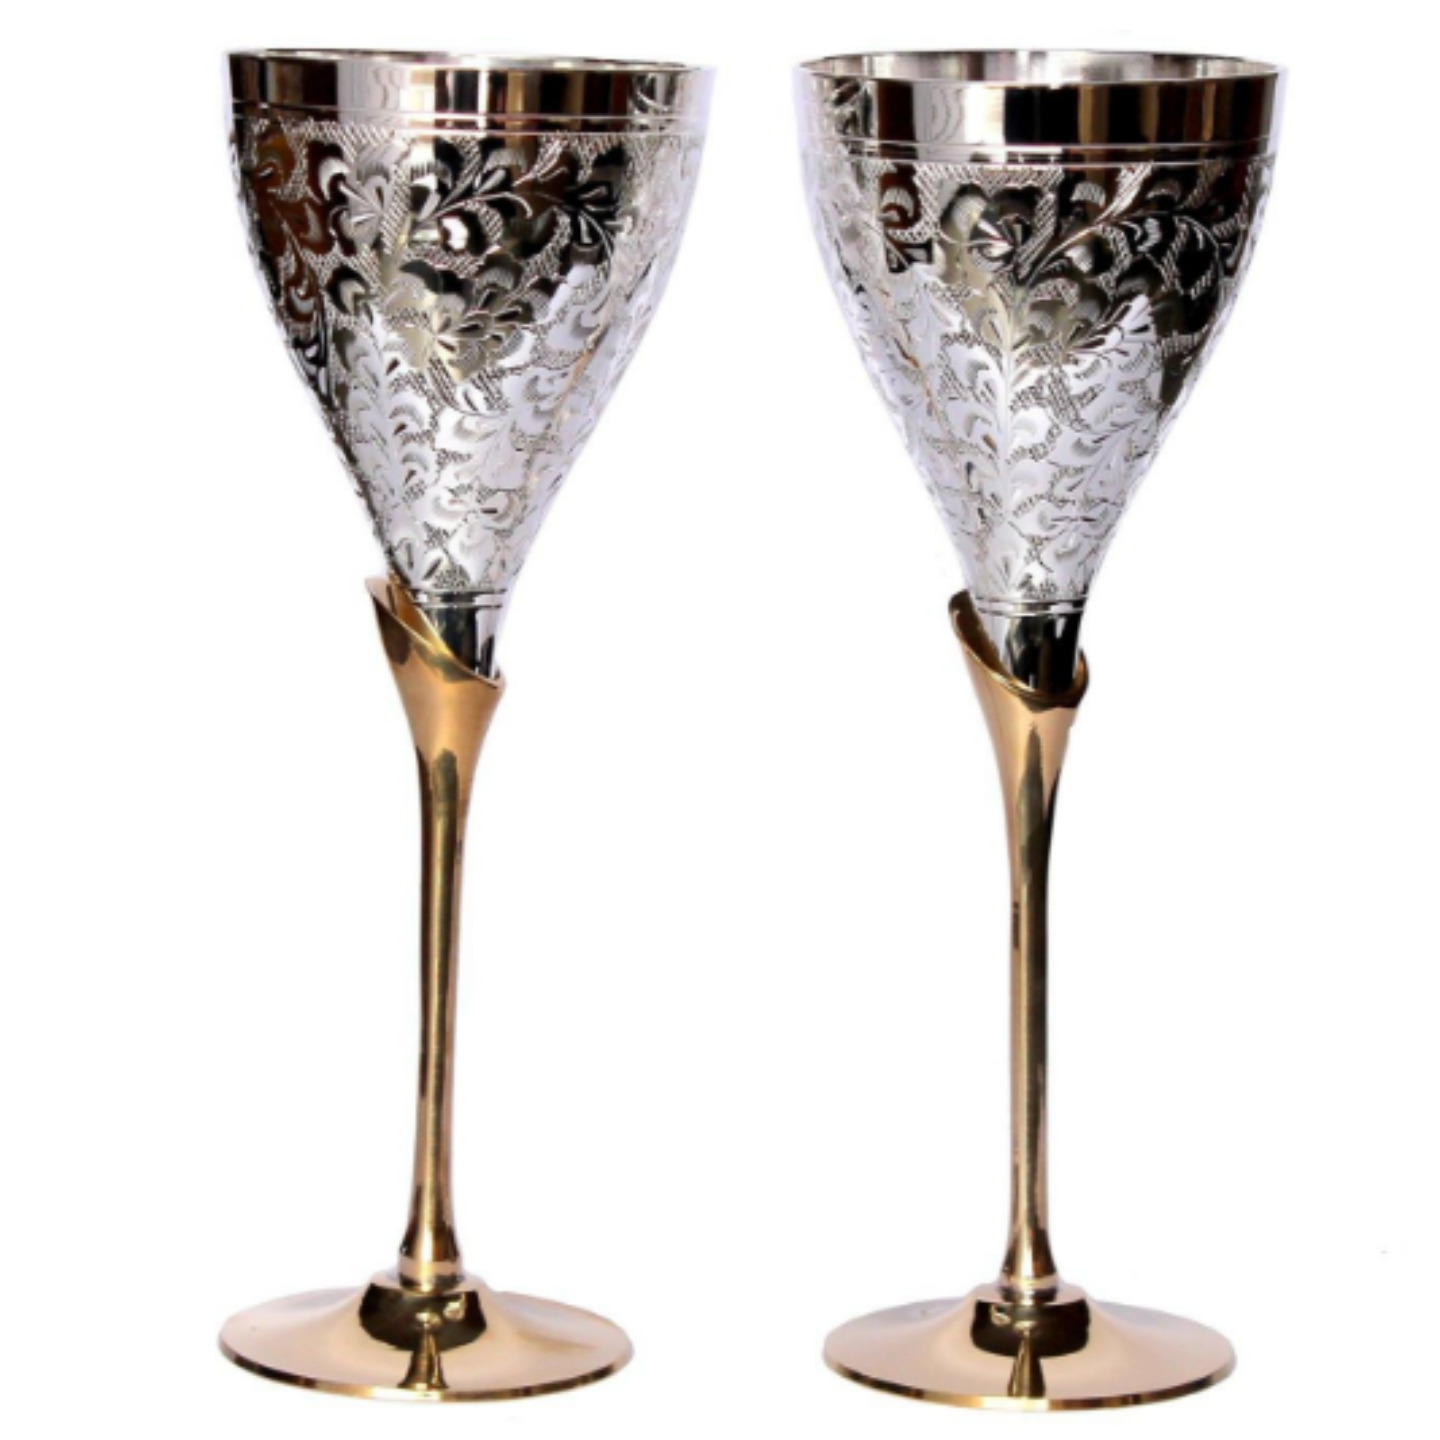 SILVER PLATED ENGRAVED PURE BRASS PREMIUM GOBLET CHAMPAGNE FLUTES COUPES WINE GLASS SET OF 2